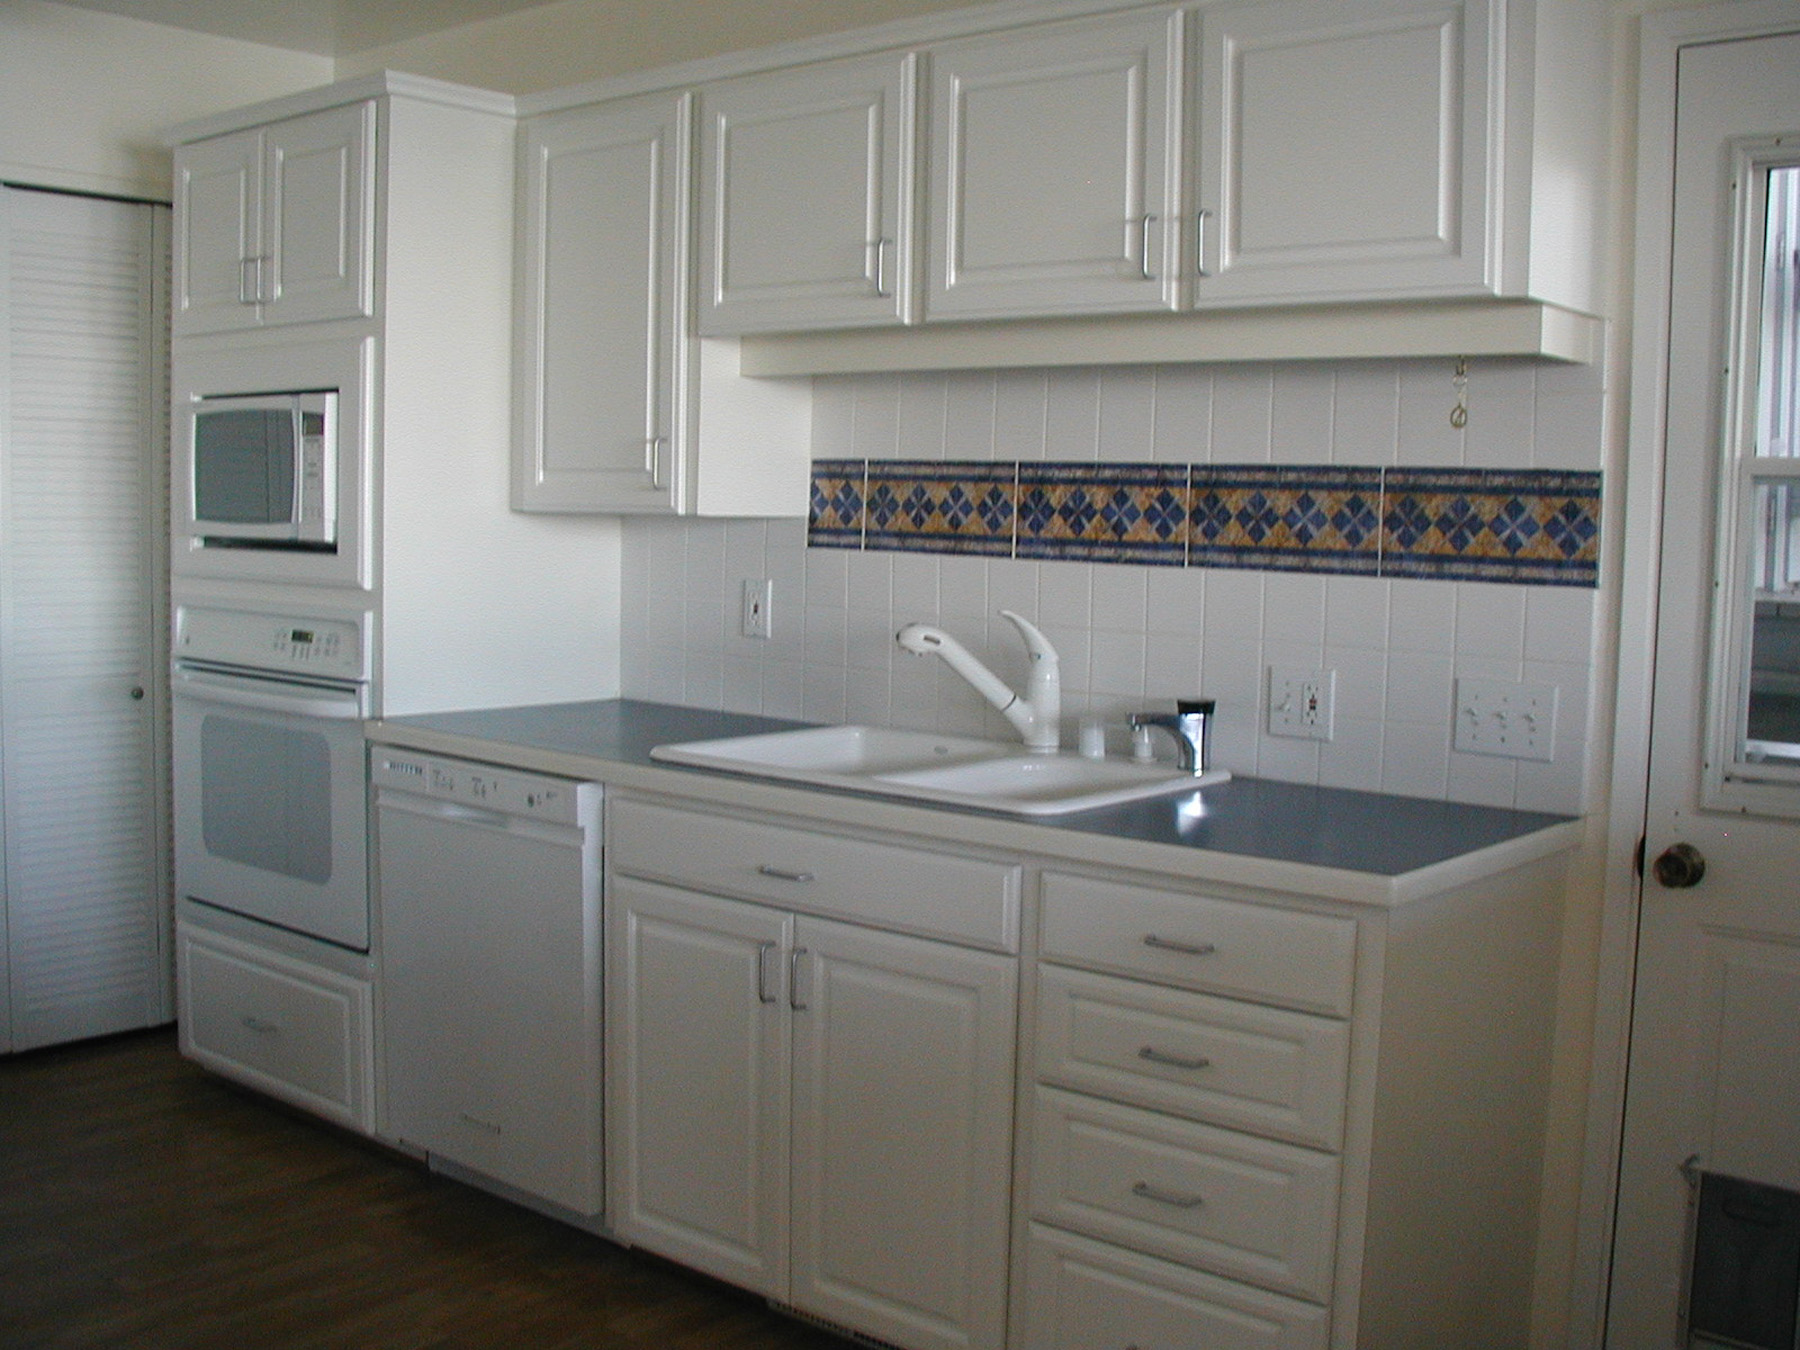 Include Decorative Tile In Your Kitchen Or Bath Design Rose Construction Inc